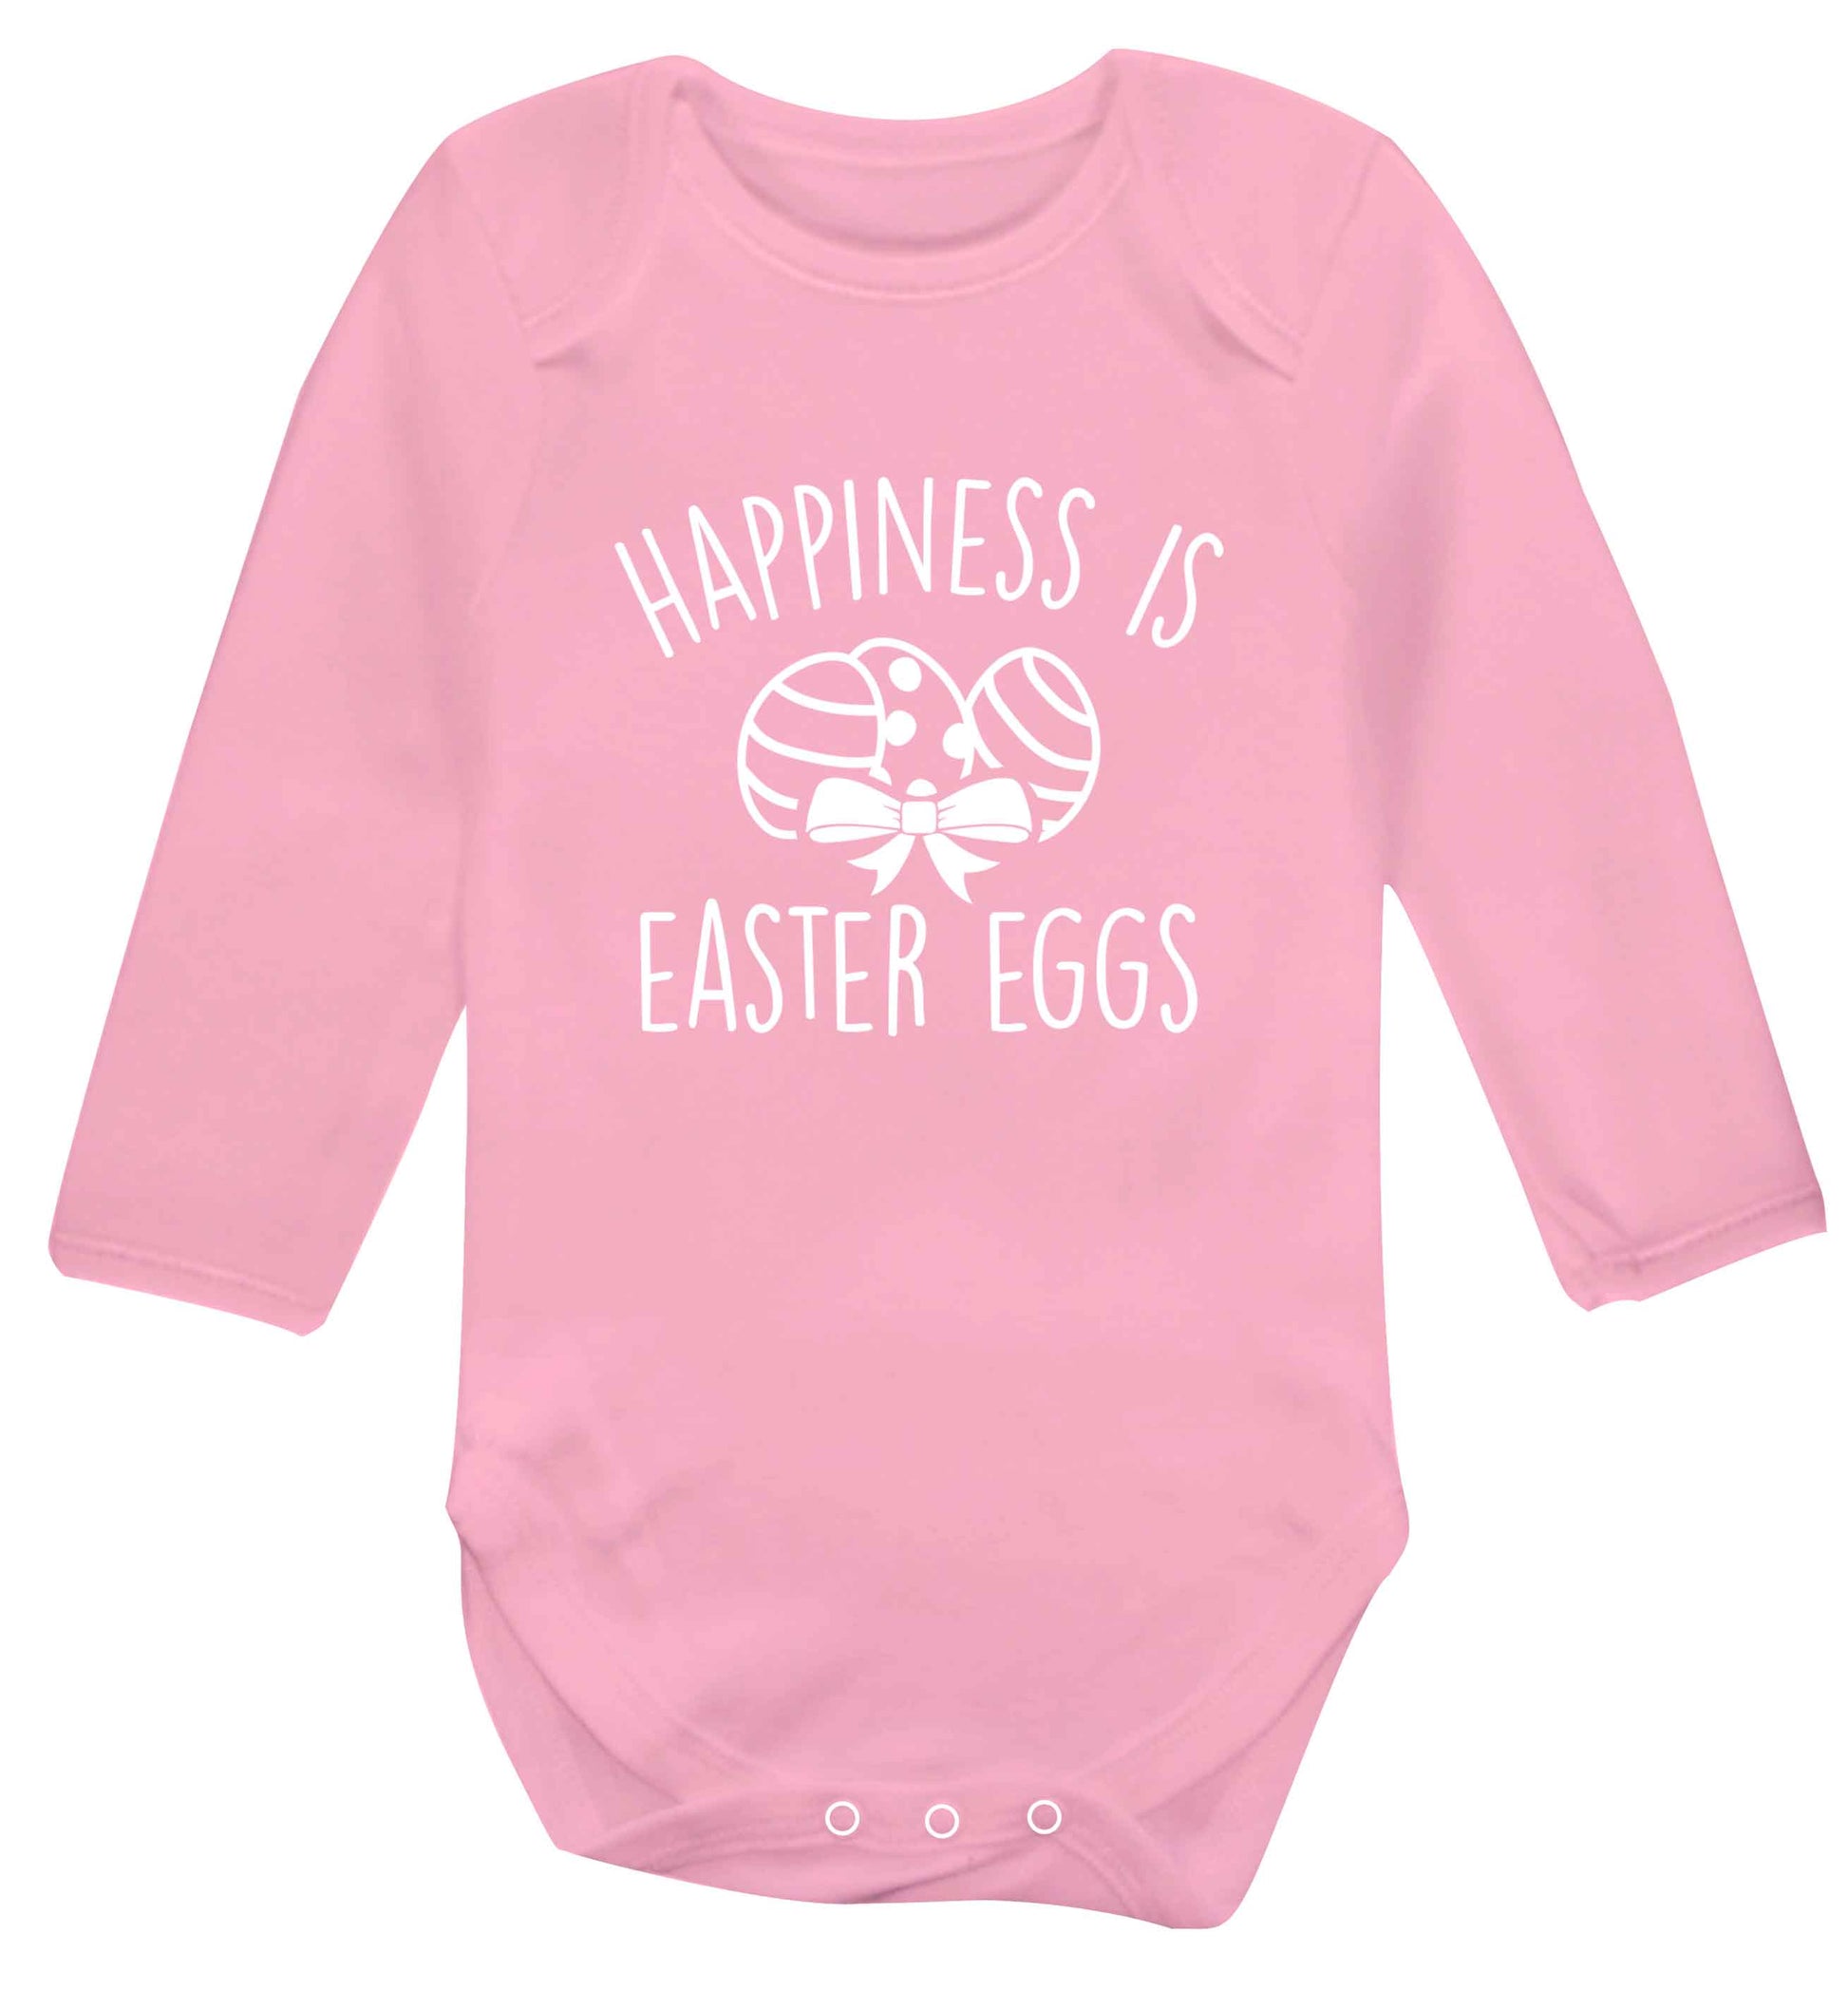 Happiness is Easter eggs baby vest long sleeved pale pink 6-12 months